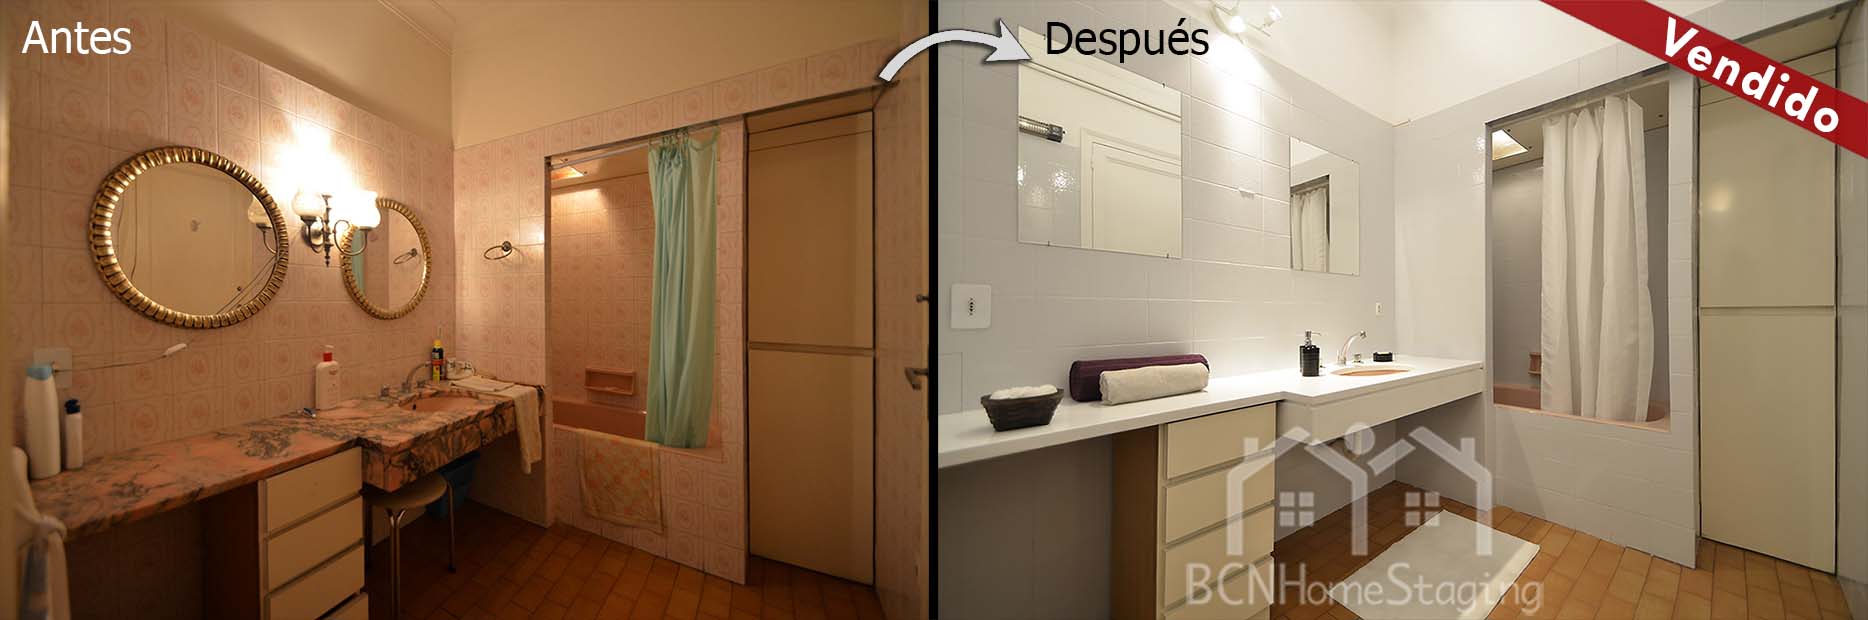 home-staging-barcelona-lavabo-antes-despues